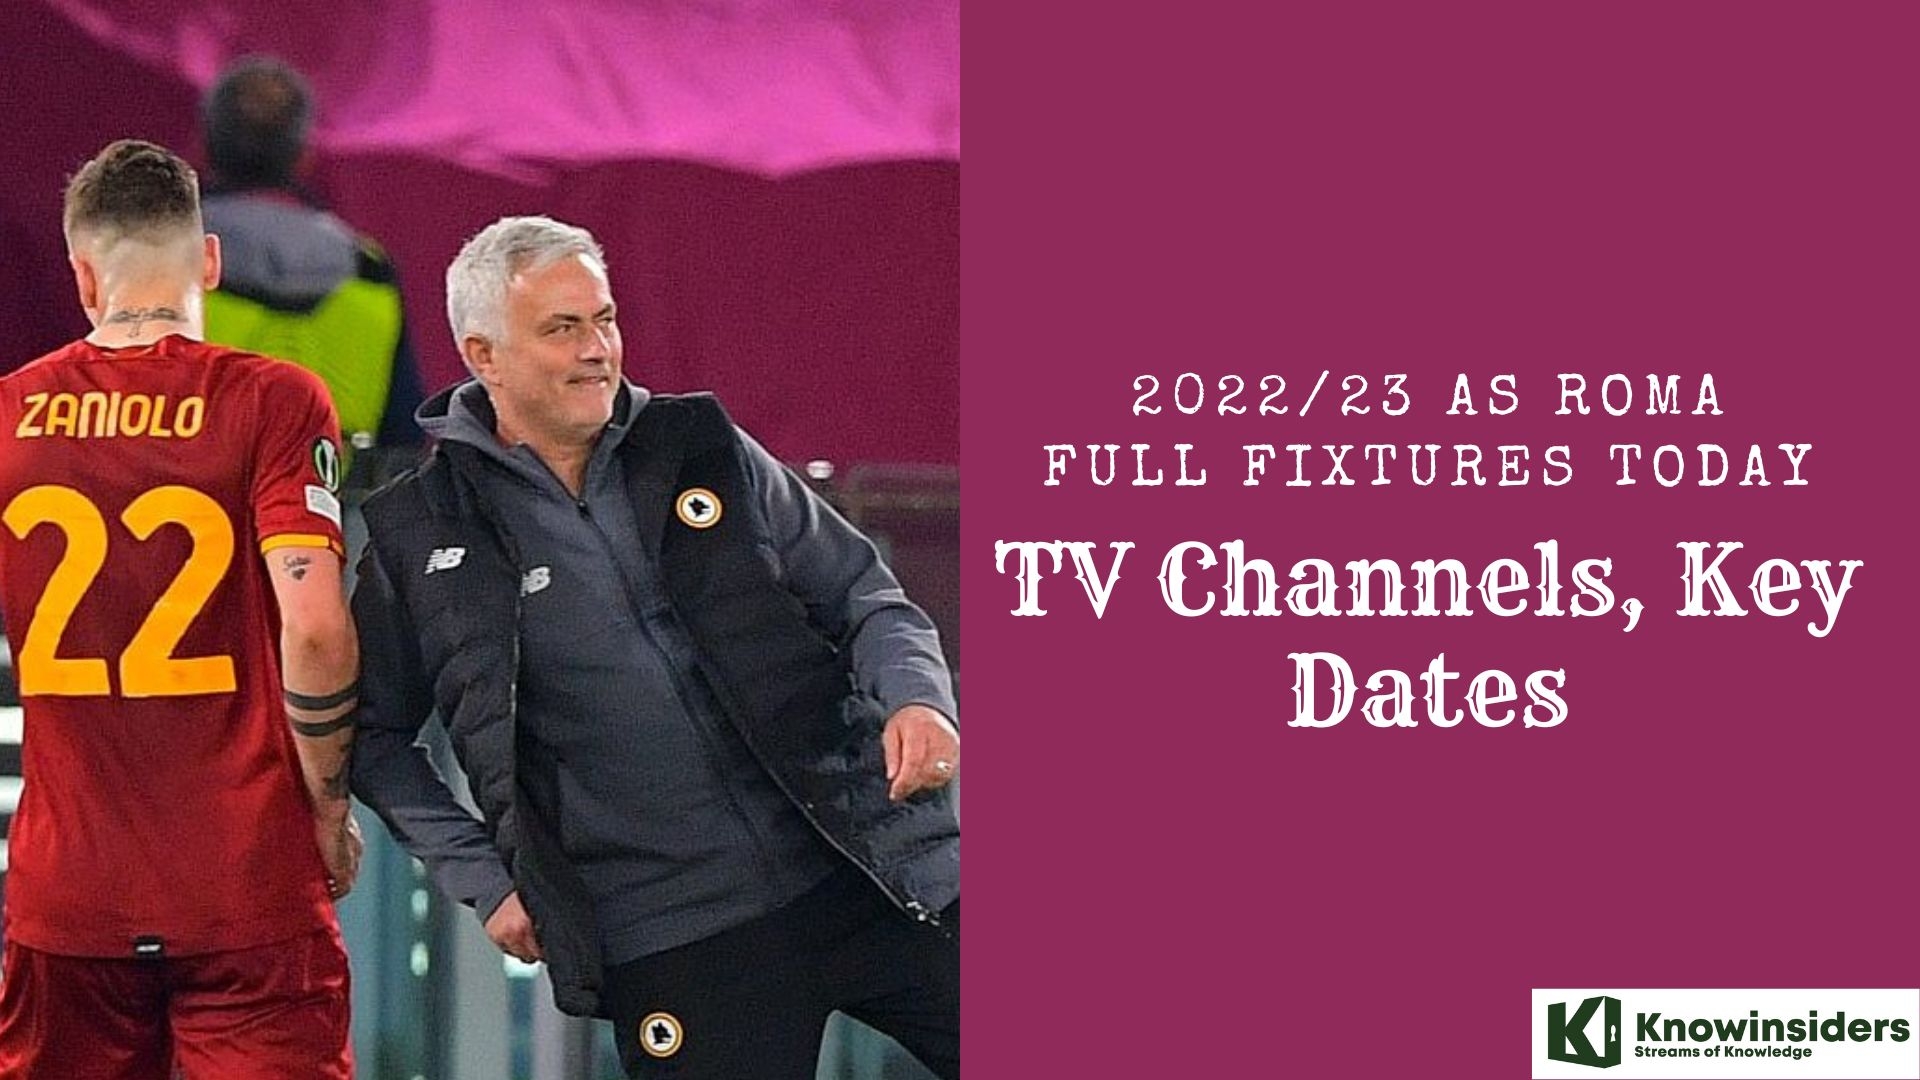 2022/23 AS Roma Full Fixtures Today: TV Channels, Key Dates  Knowinsiders.com 